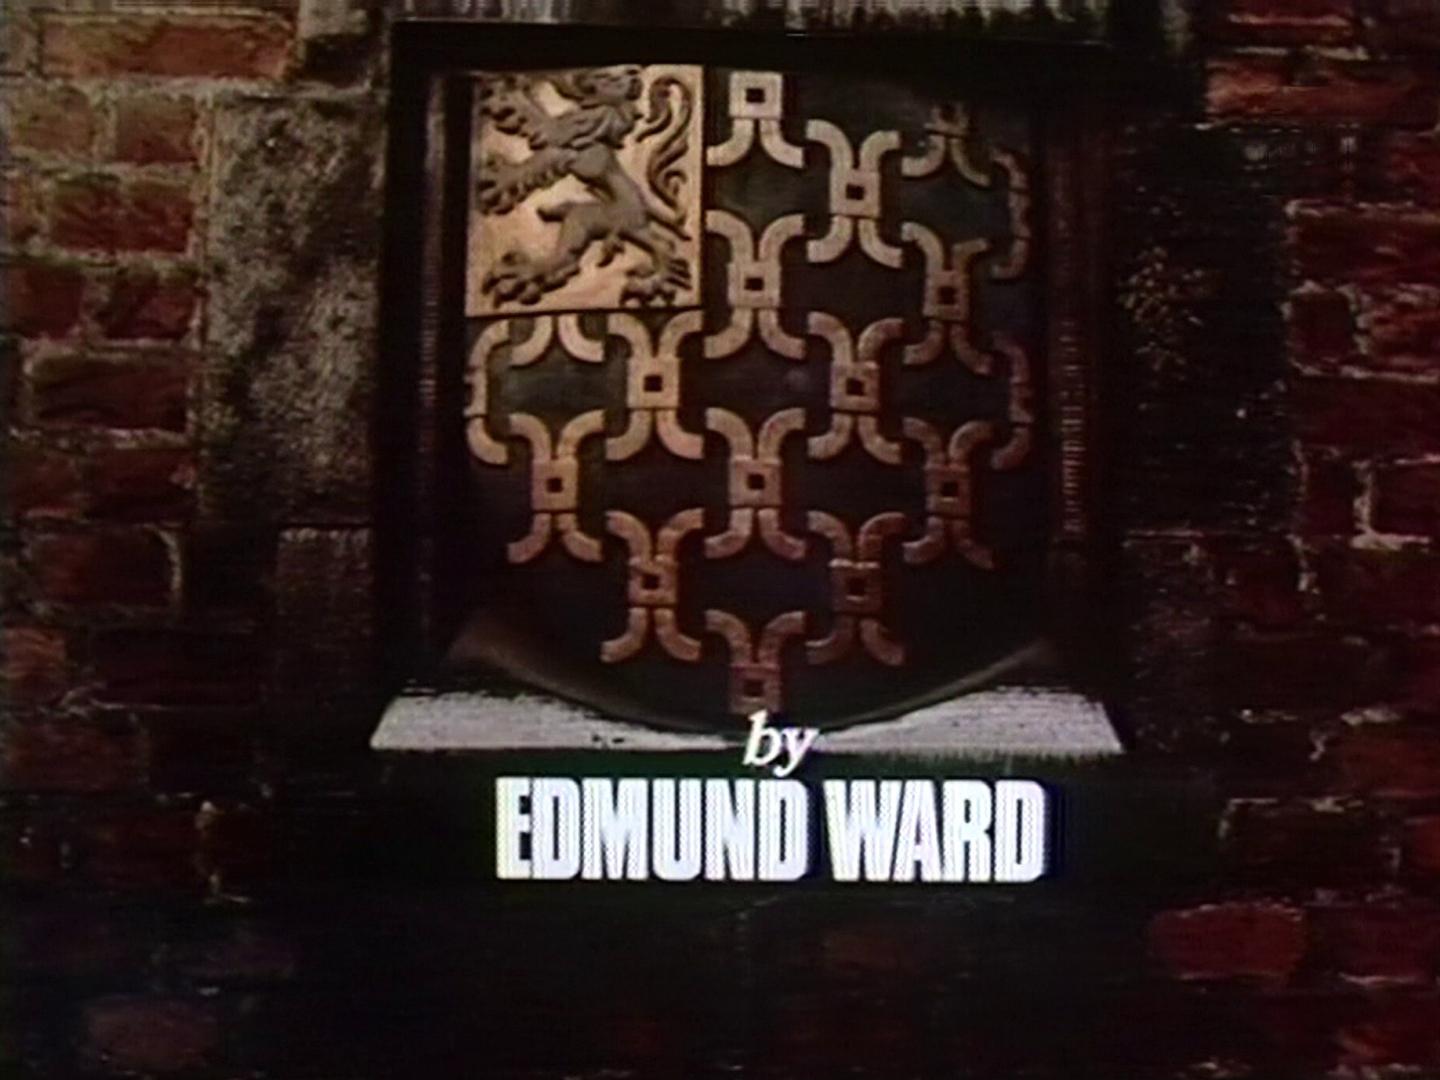 Main title from the ‘By Order of the Magistrates’ episode of Justice (1971-74) (2). By Edmund Ward